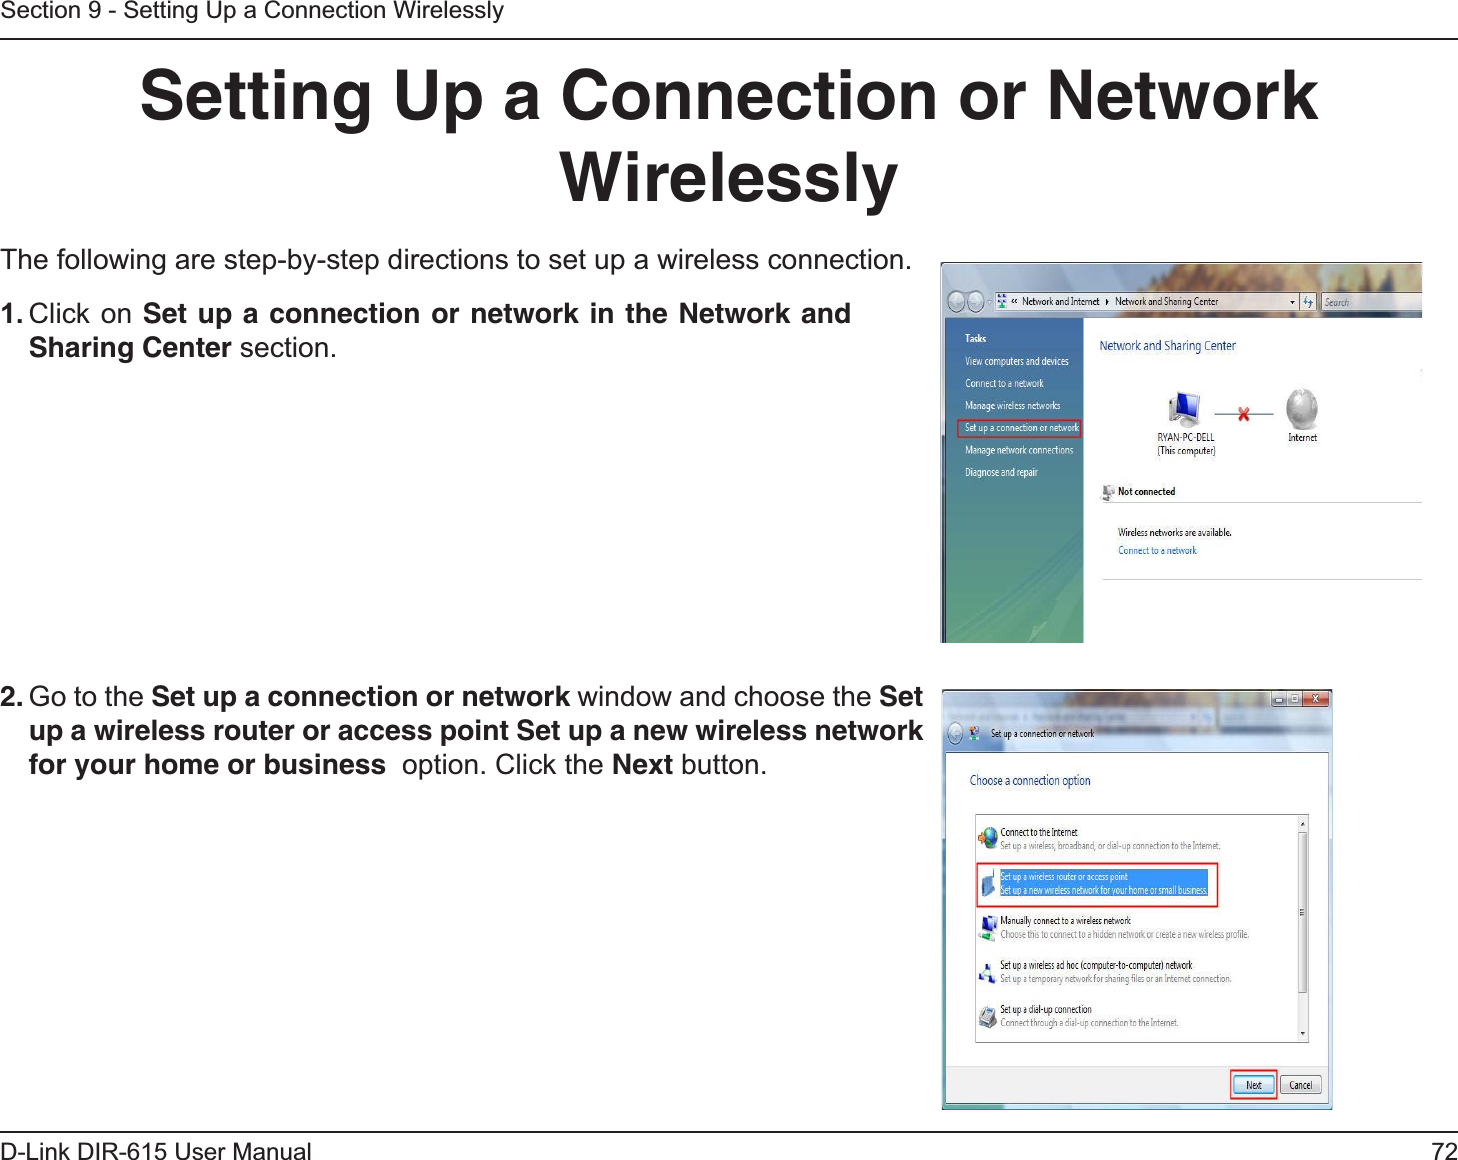 72D-Link DIR-615 User ManualSection 9 - Setting Up a Connection WirelesslySetting Up a Connection or Network WirelesslyThe following are step-by-step directions to set up a wireless connection.2. Go to the Set up a connection or network window and choose the Set up a wireless router or access point Set up a new wireless network for your home or business  option. Click the Next button. 1. Click on Set up a connection or network in the Network and Sharing Center section.